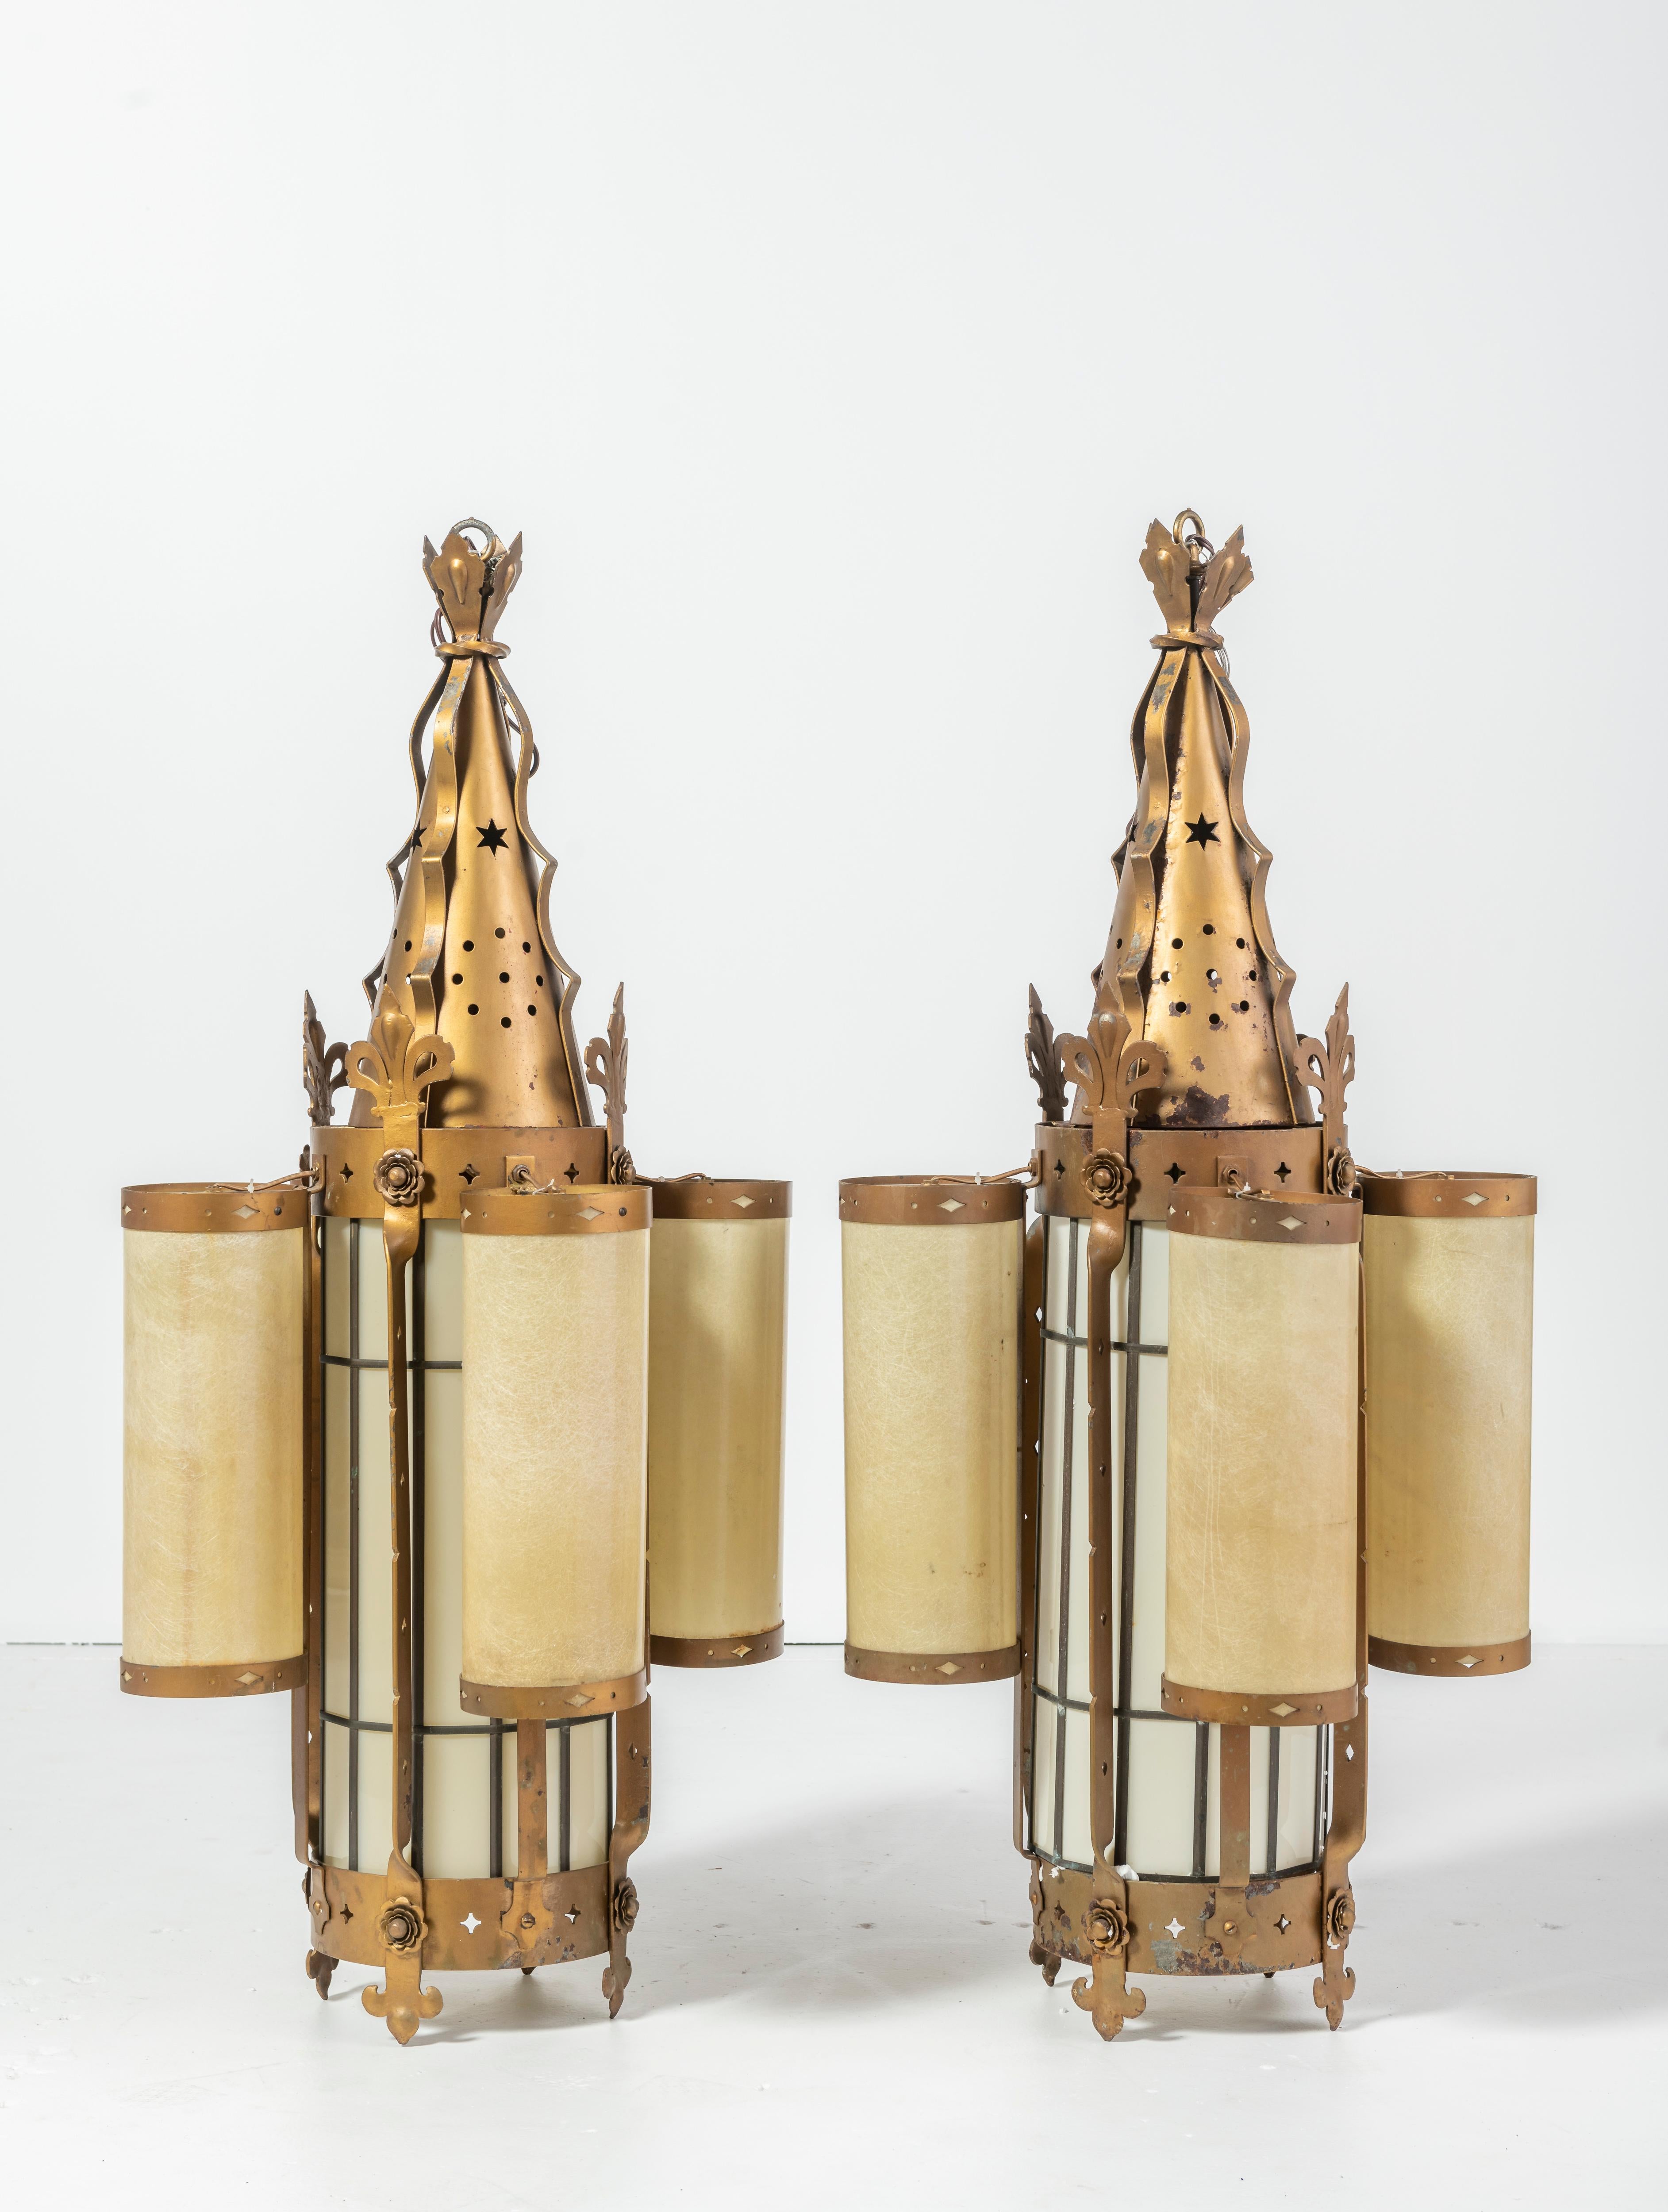 Vintage pair of ornate pendants in brass, ivory and amber fiberglass, which casts a lovely, soft light. Rare design with 4 light columns circling 1 center light. Brass patina is chipped in a few places though in overall good condition given the age.